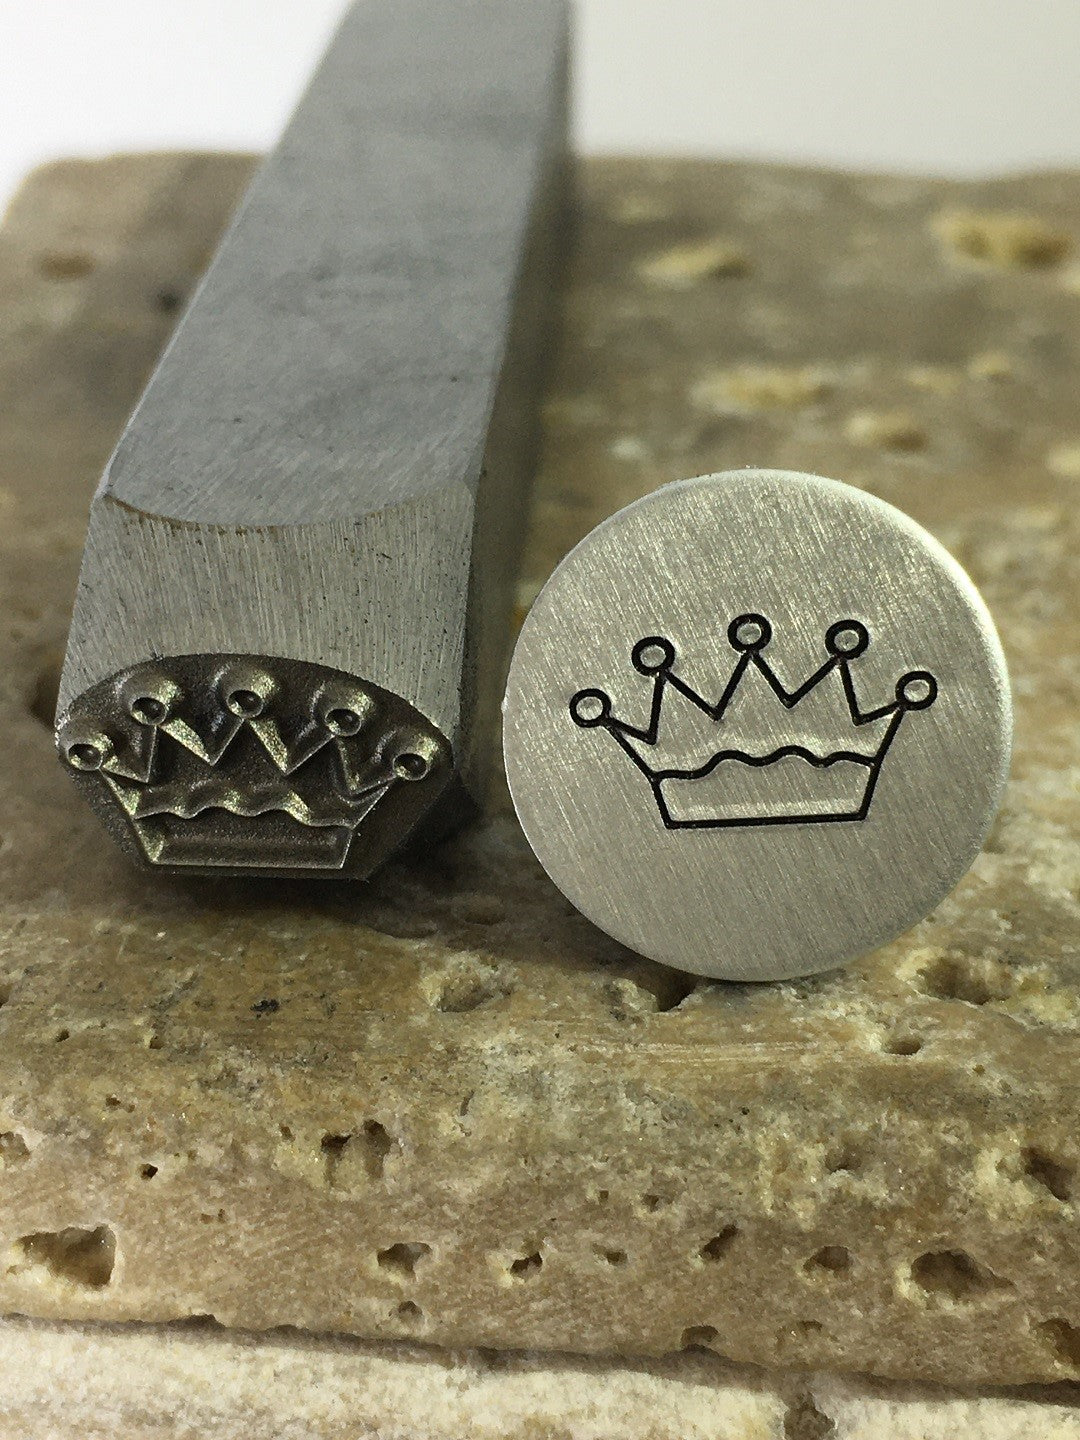 How to Stamp Metal 